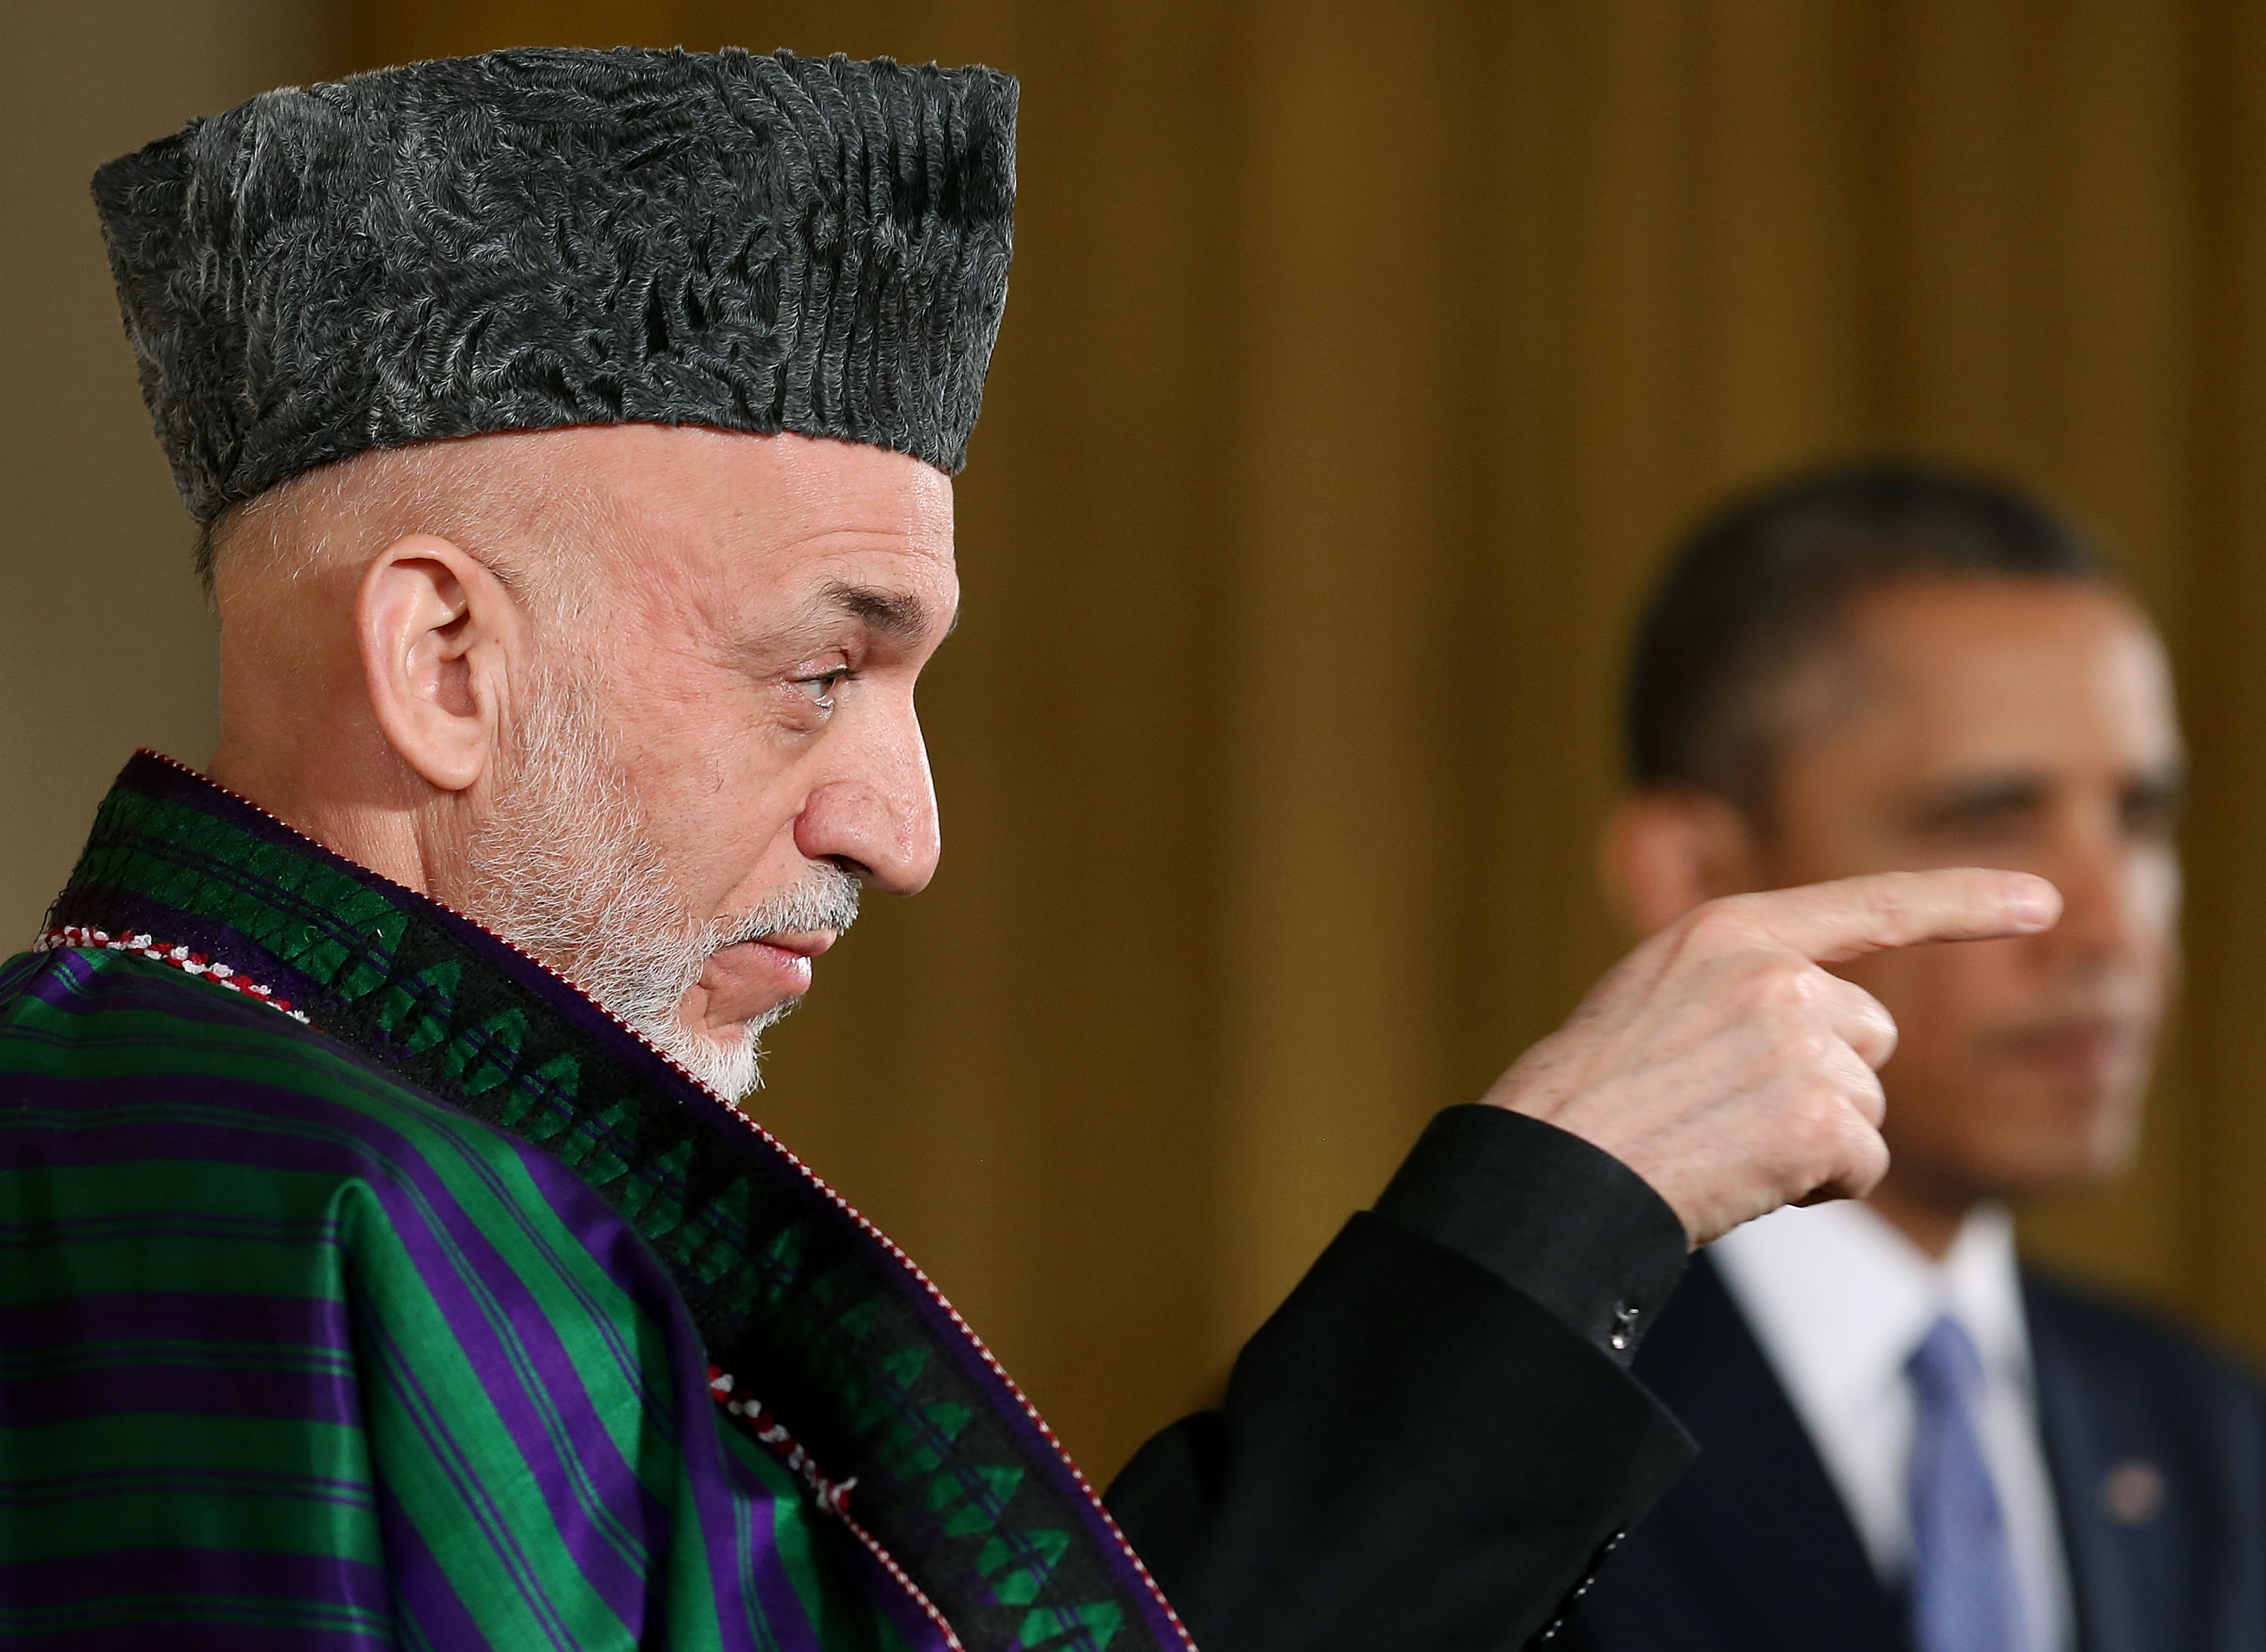 Afghan President Hamid Karzai and President Obama at the White House in 2013. (Mark Wilson / Getty Images)